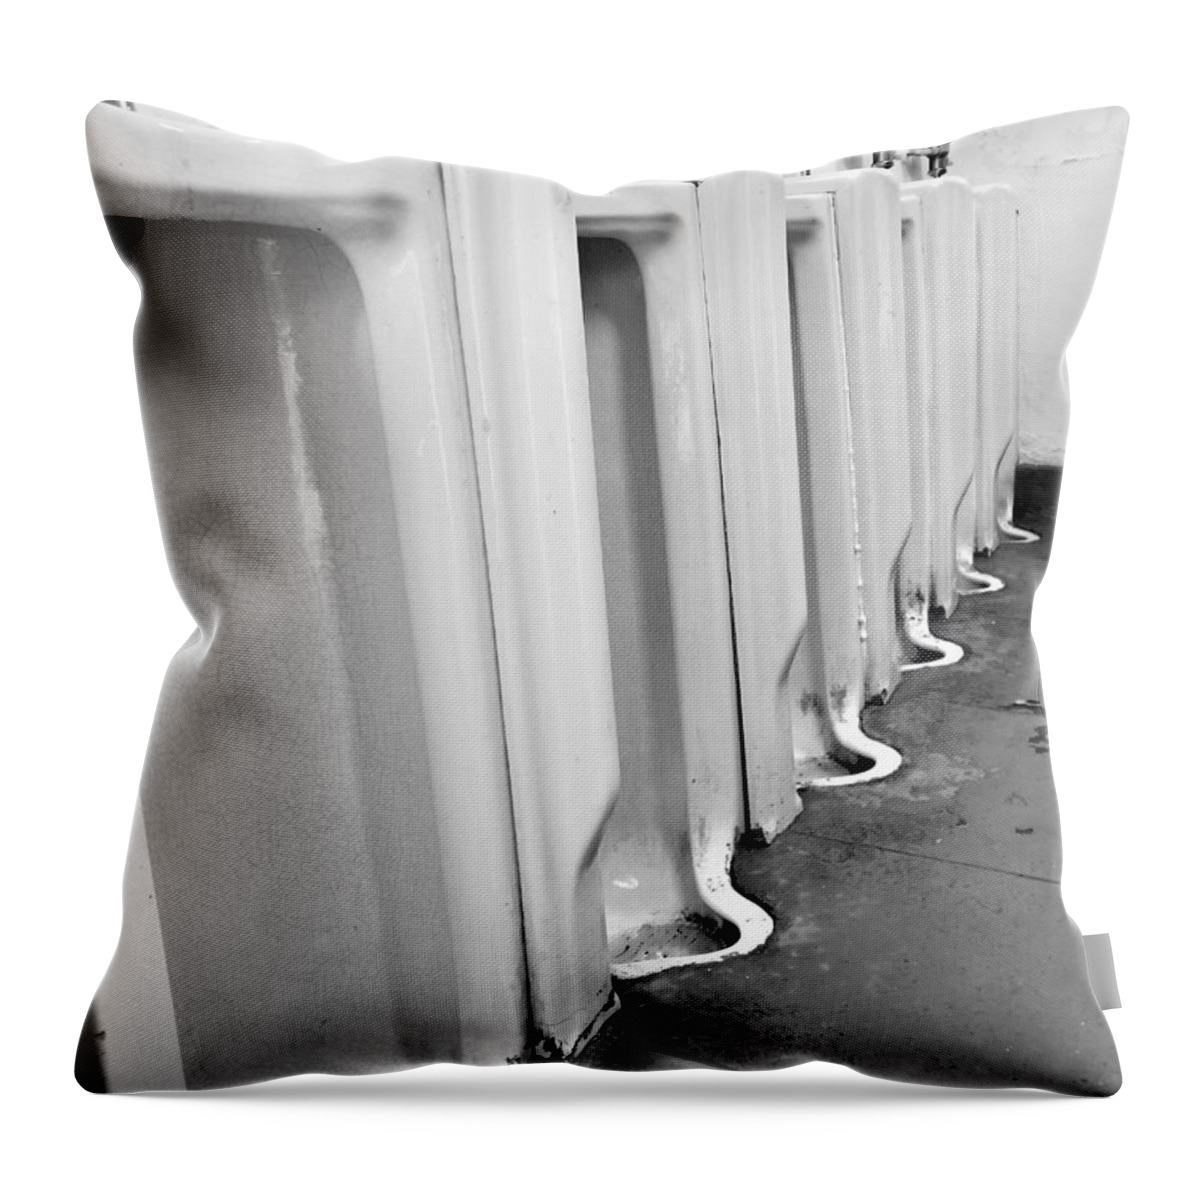 Art Throw Pillow featuring the photograph 6 Urinals by Rob Hans